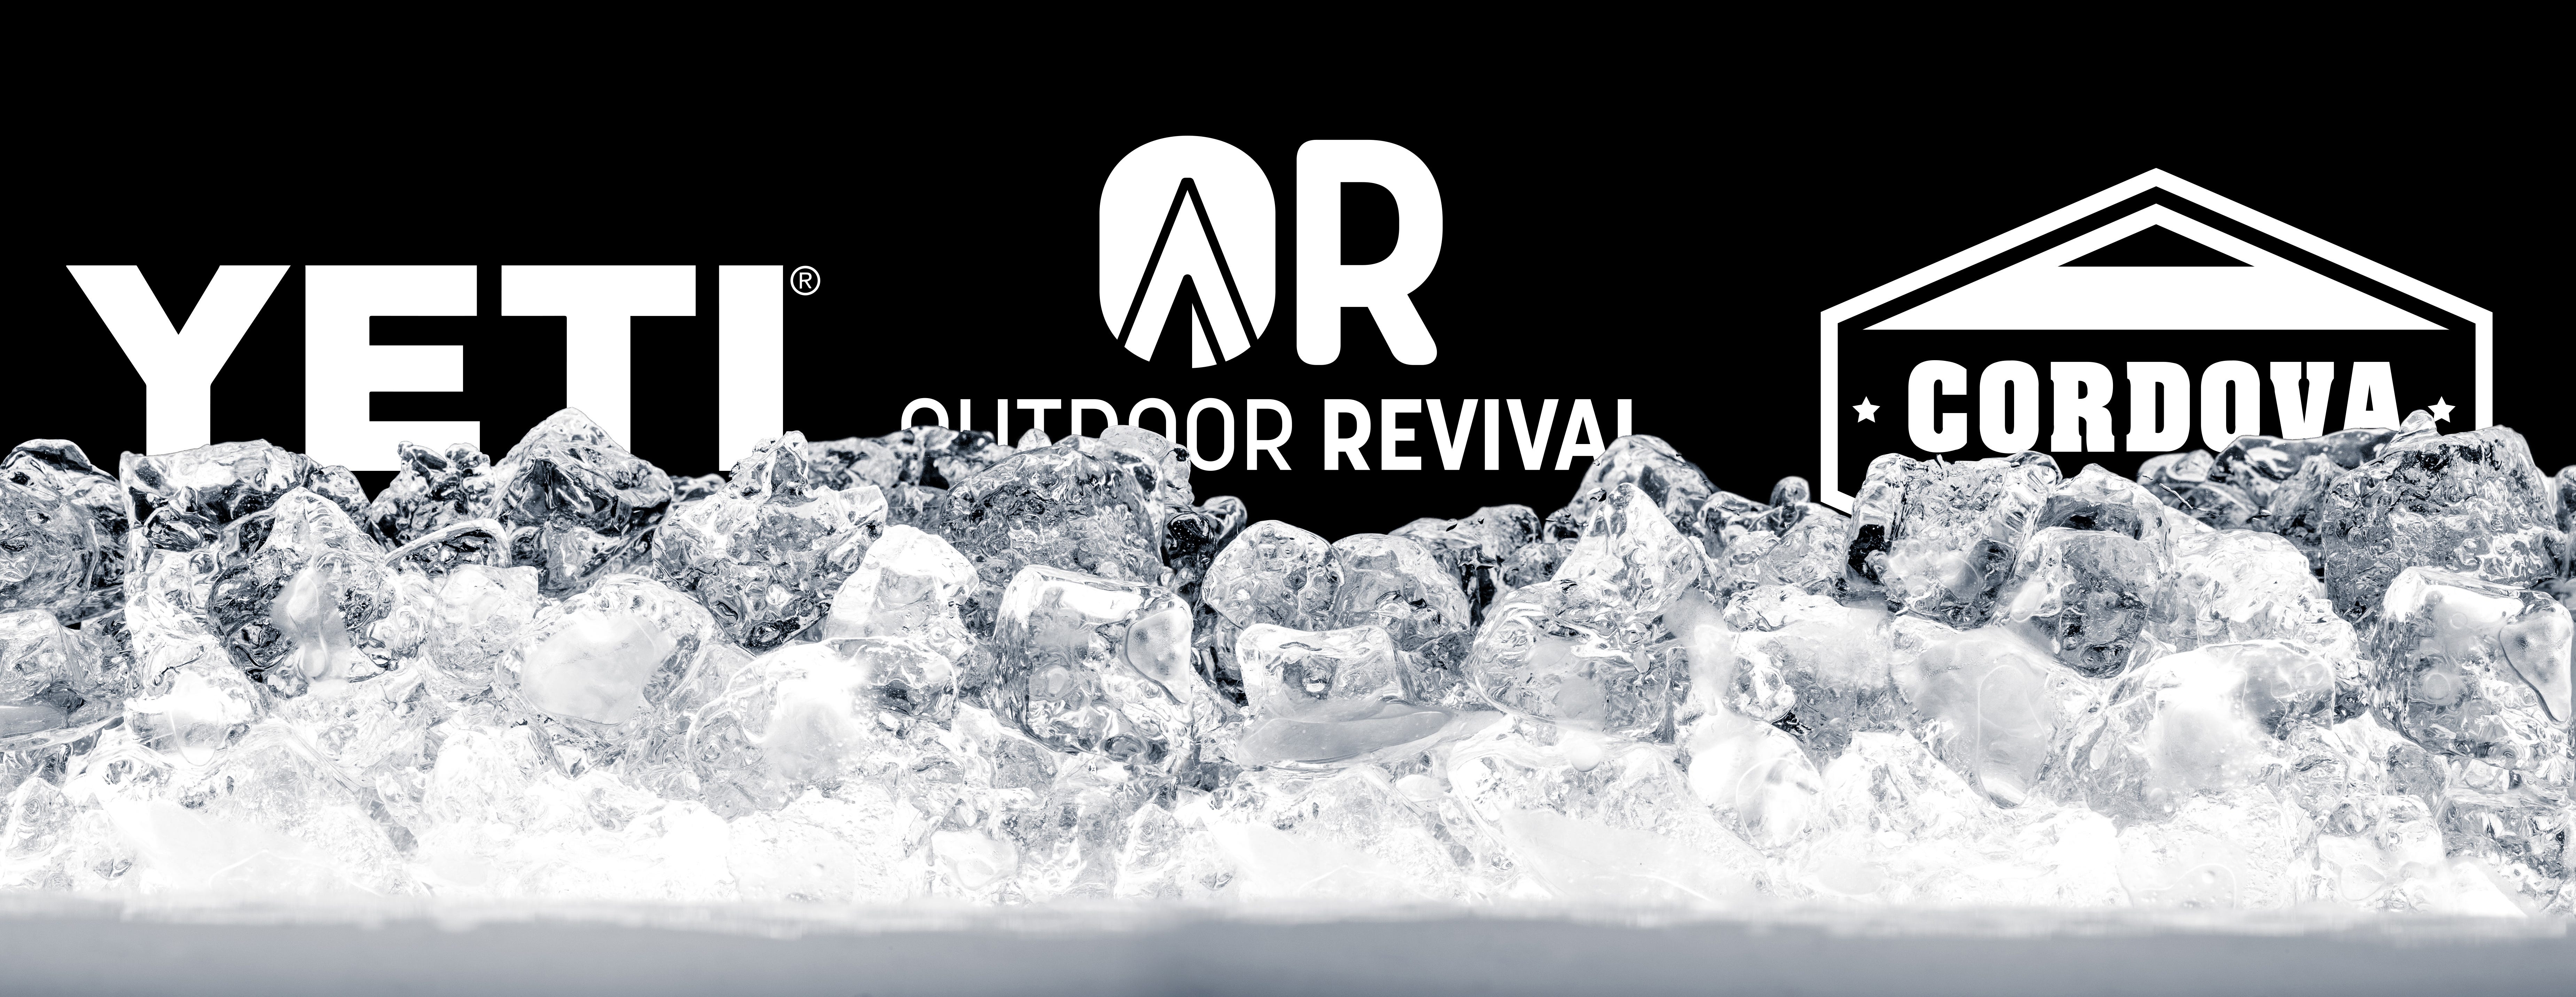 Yeti, Cordova, and Outdoor Revival logos on black background with cloeup ice in forground